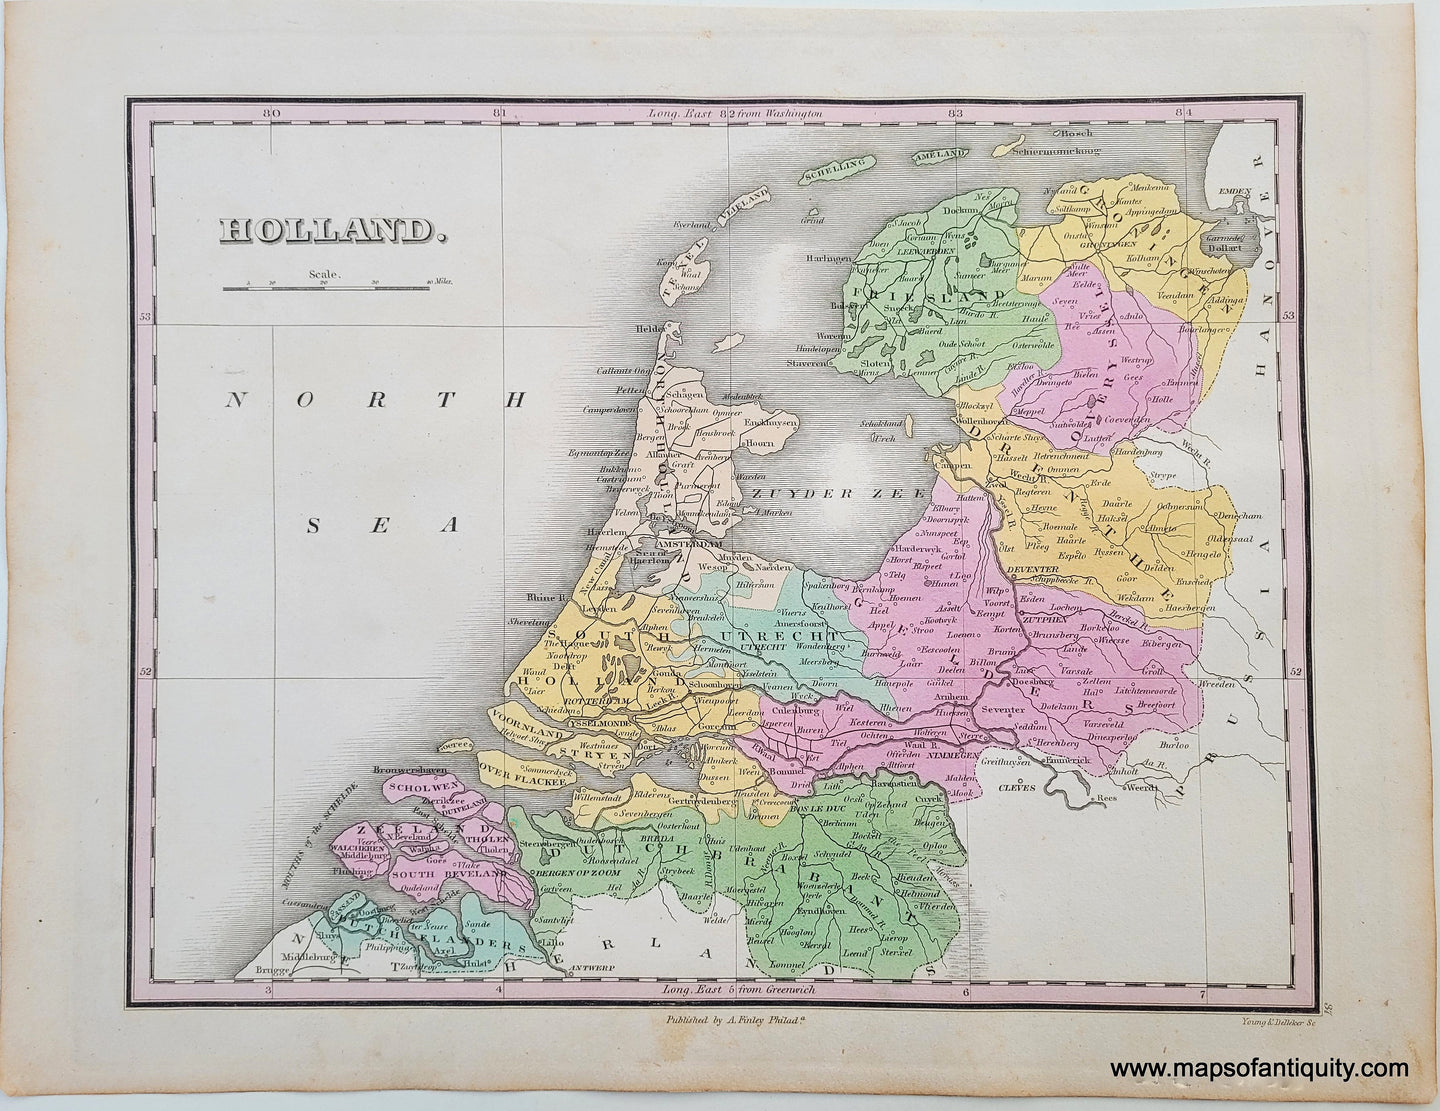 Antique-Hand-Colored-Map-Holland.-**********-Europe-Holland-1824-Anthony-Finley-Maps-Of-Antiquity